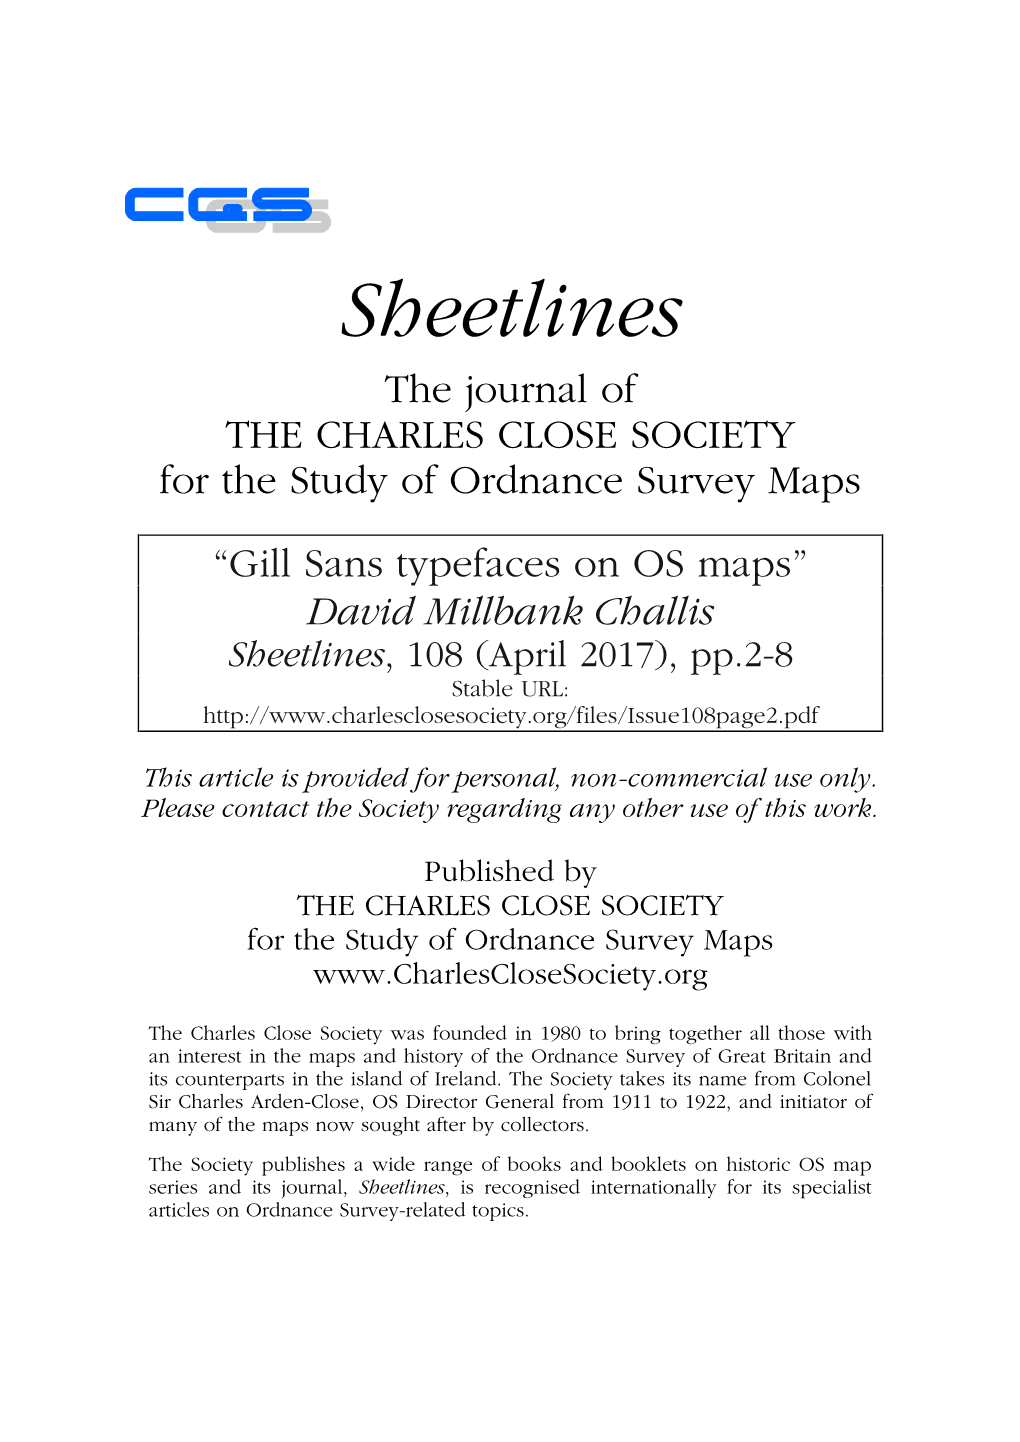 “Gill Sans Typefaces on OS Maps” David Millbank Challis Sheetlines, 108 (April 2017), Pp.2-8 Stable URL